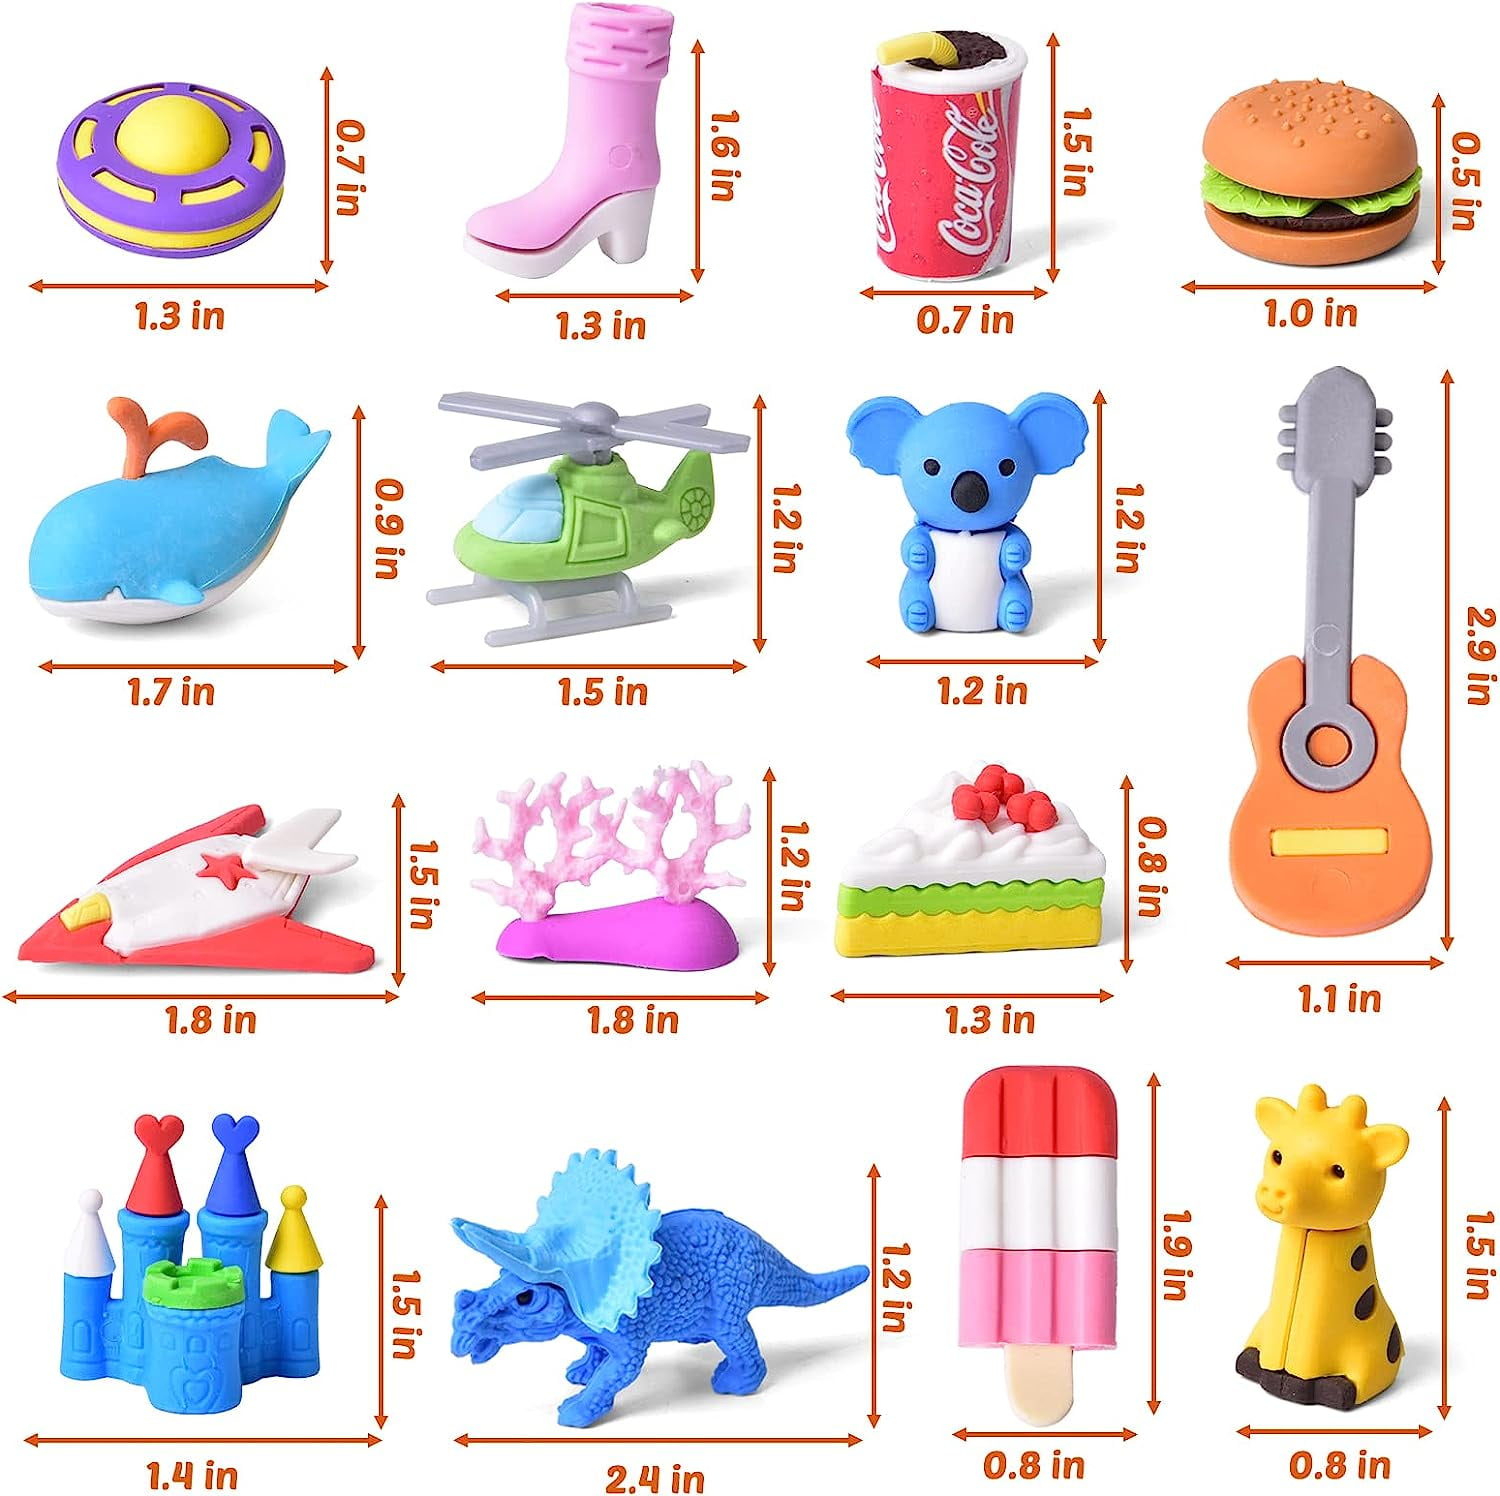 Fun Little Toys - 72 Pcs Exciting Puzzle Erasers